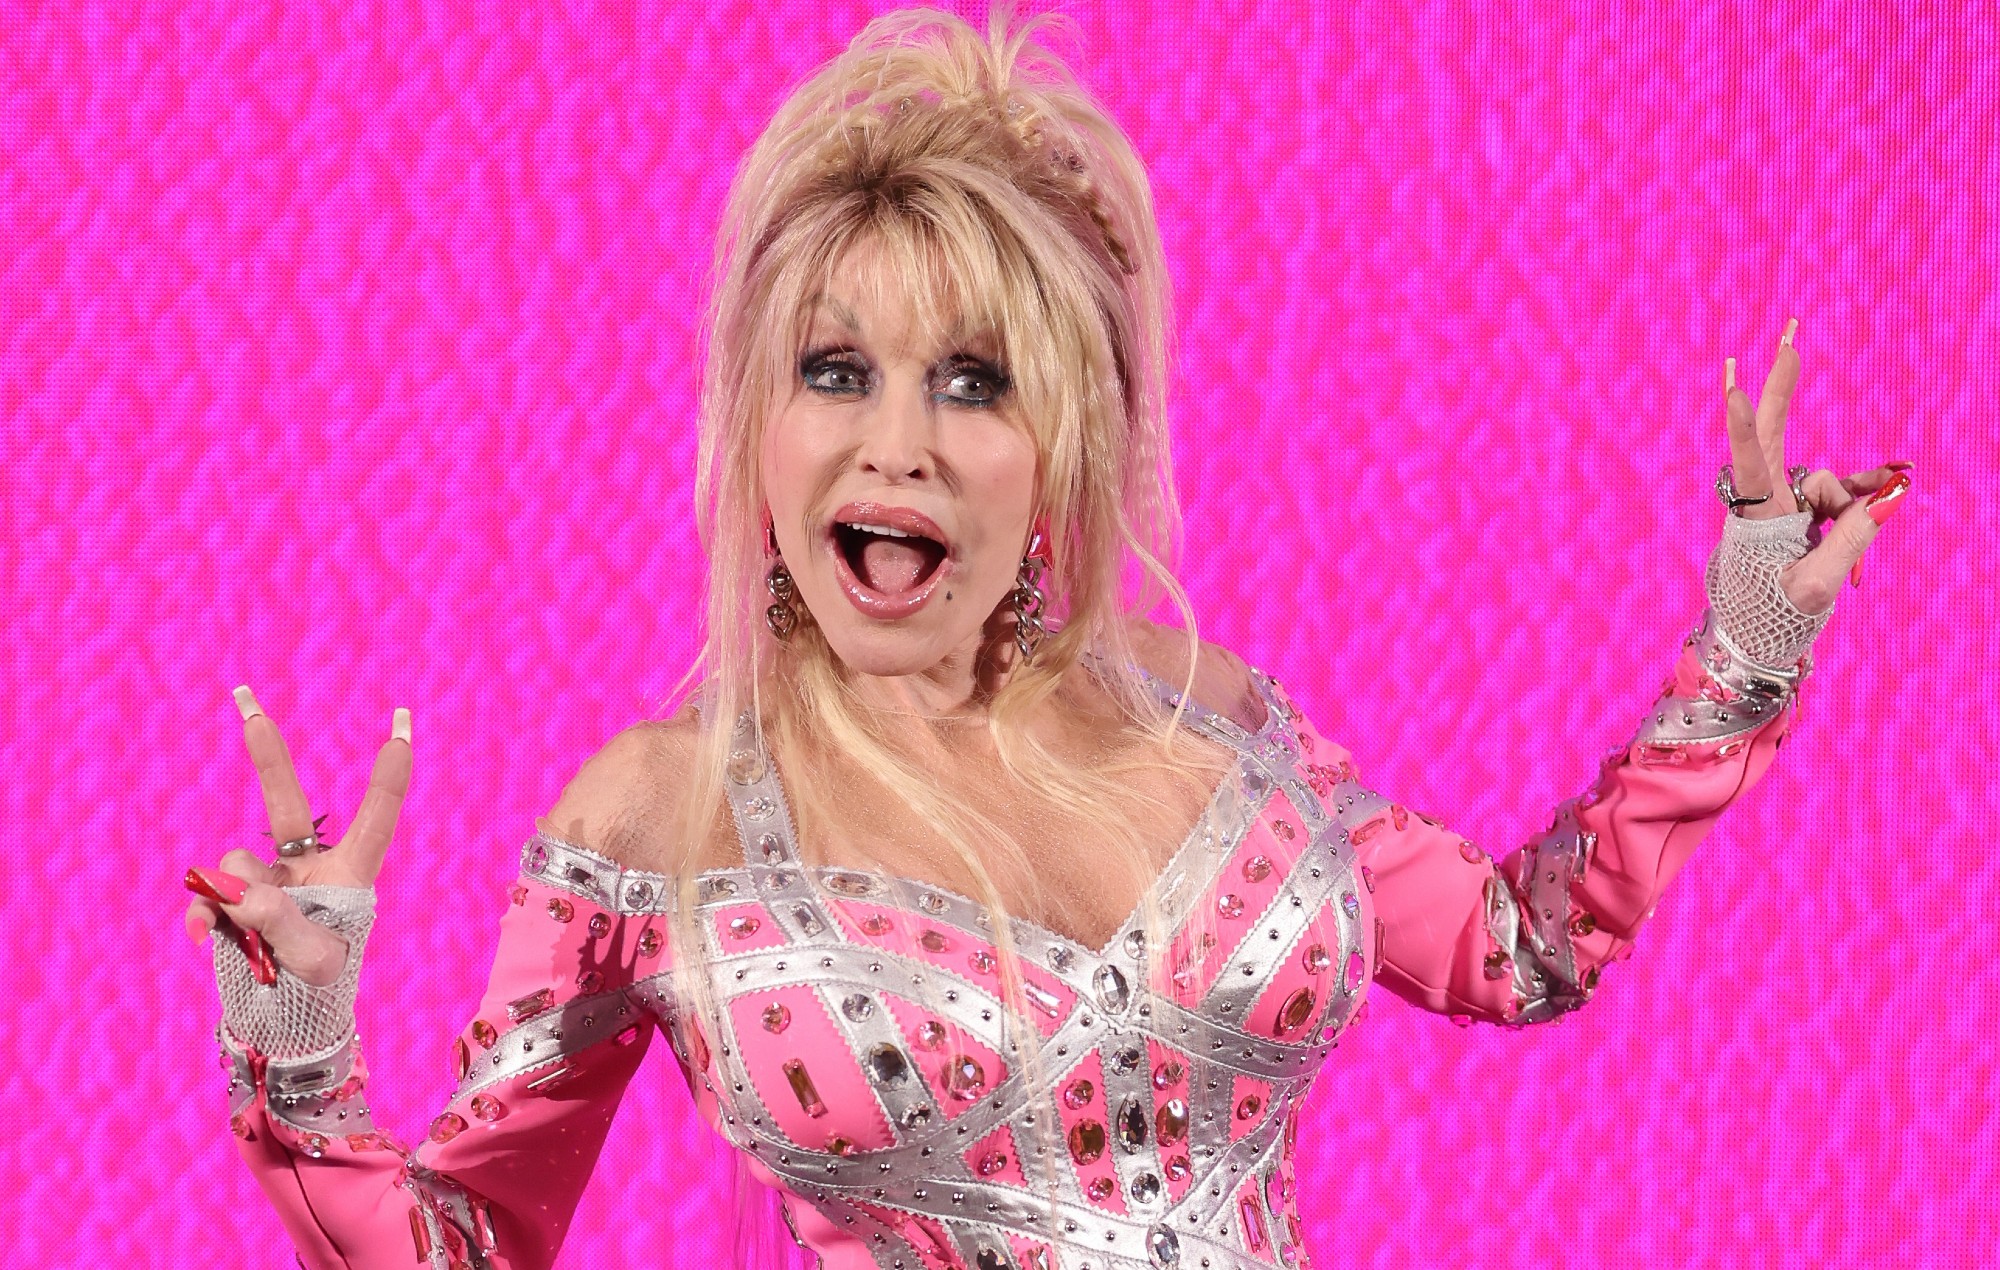 Dolly Parton to debut new tracks from ‘Rockstar’ album at “first listen” event in cinemas